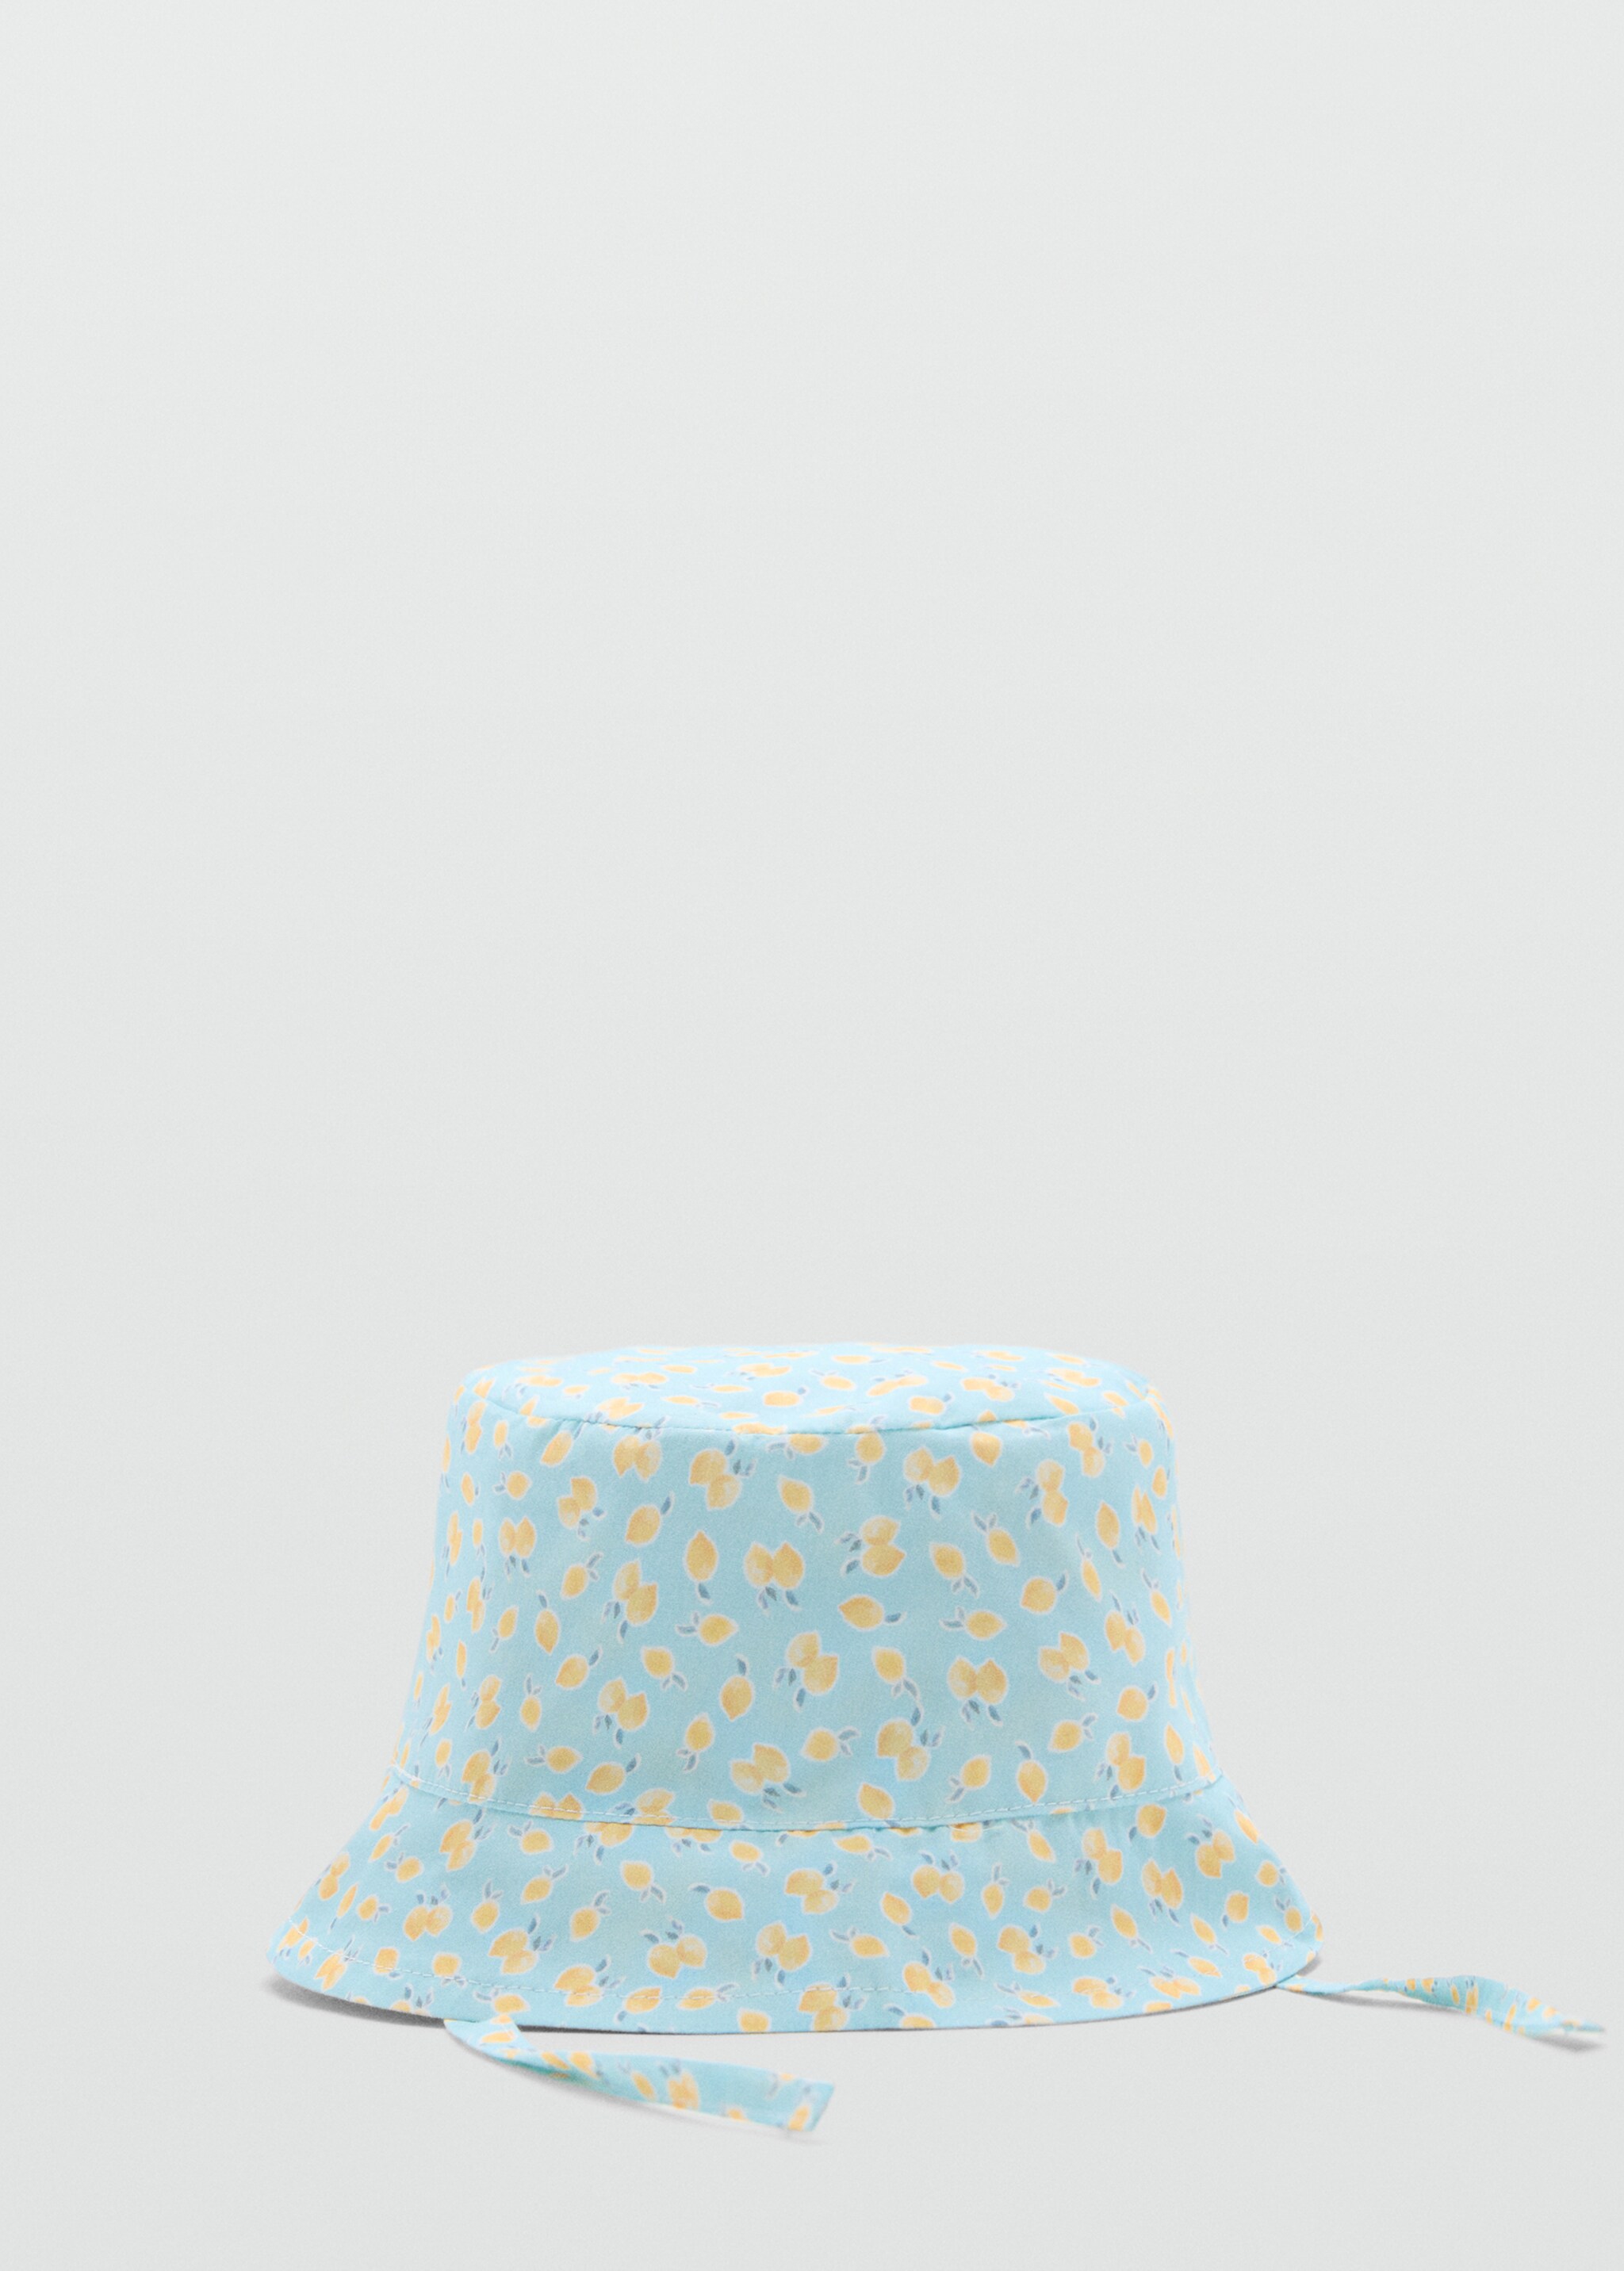 Bucket print hat - Article without model